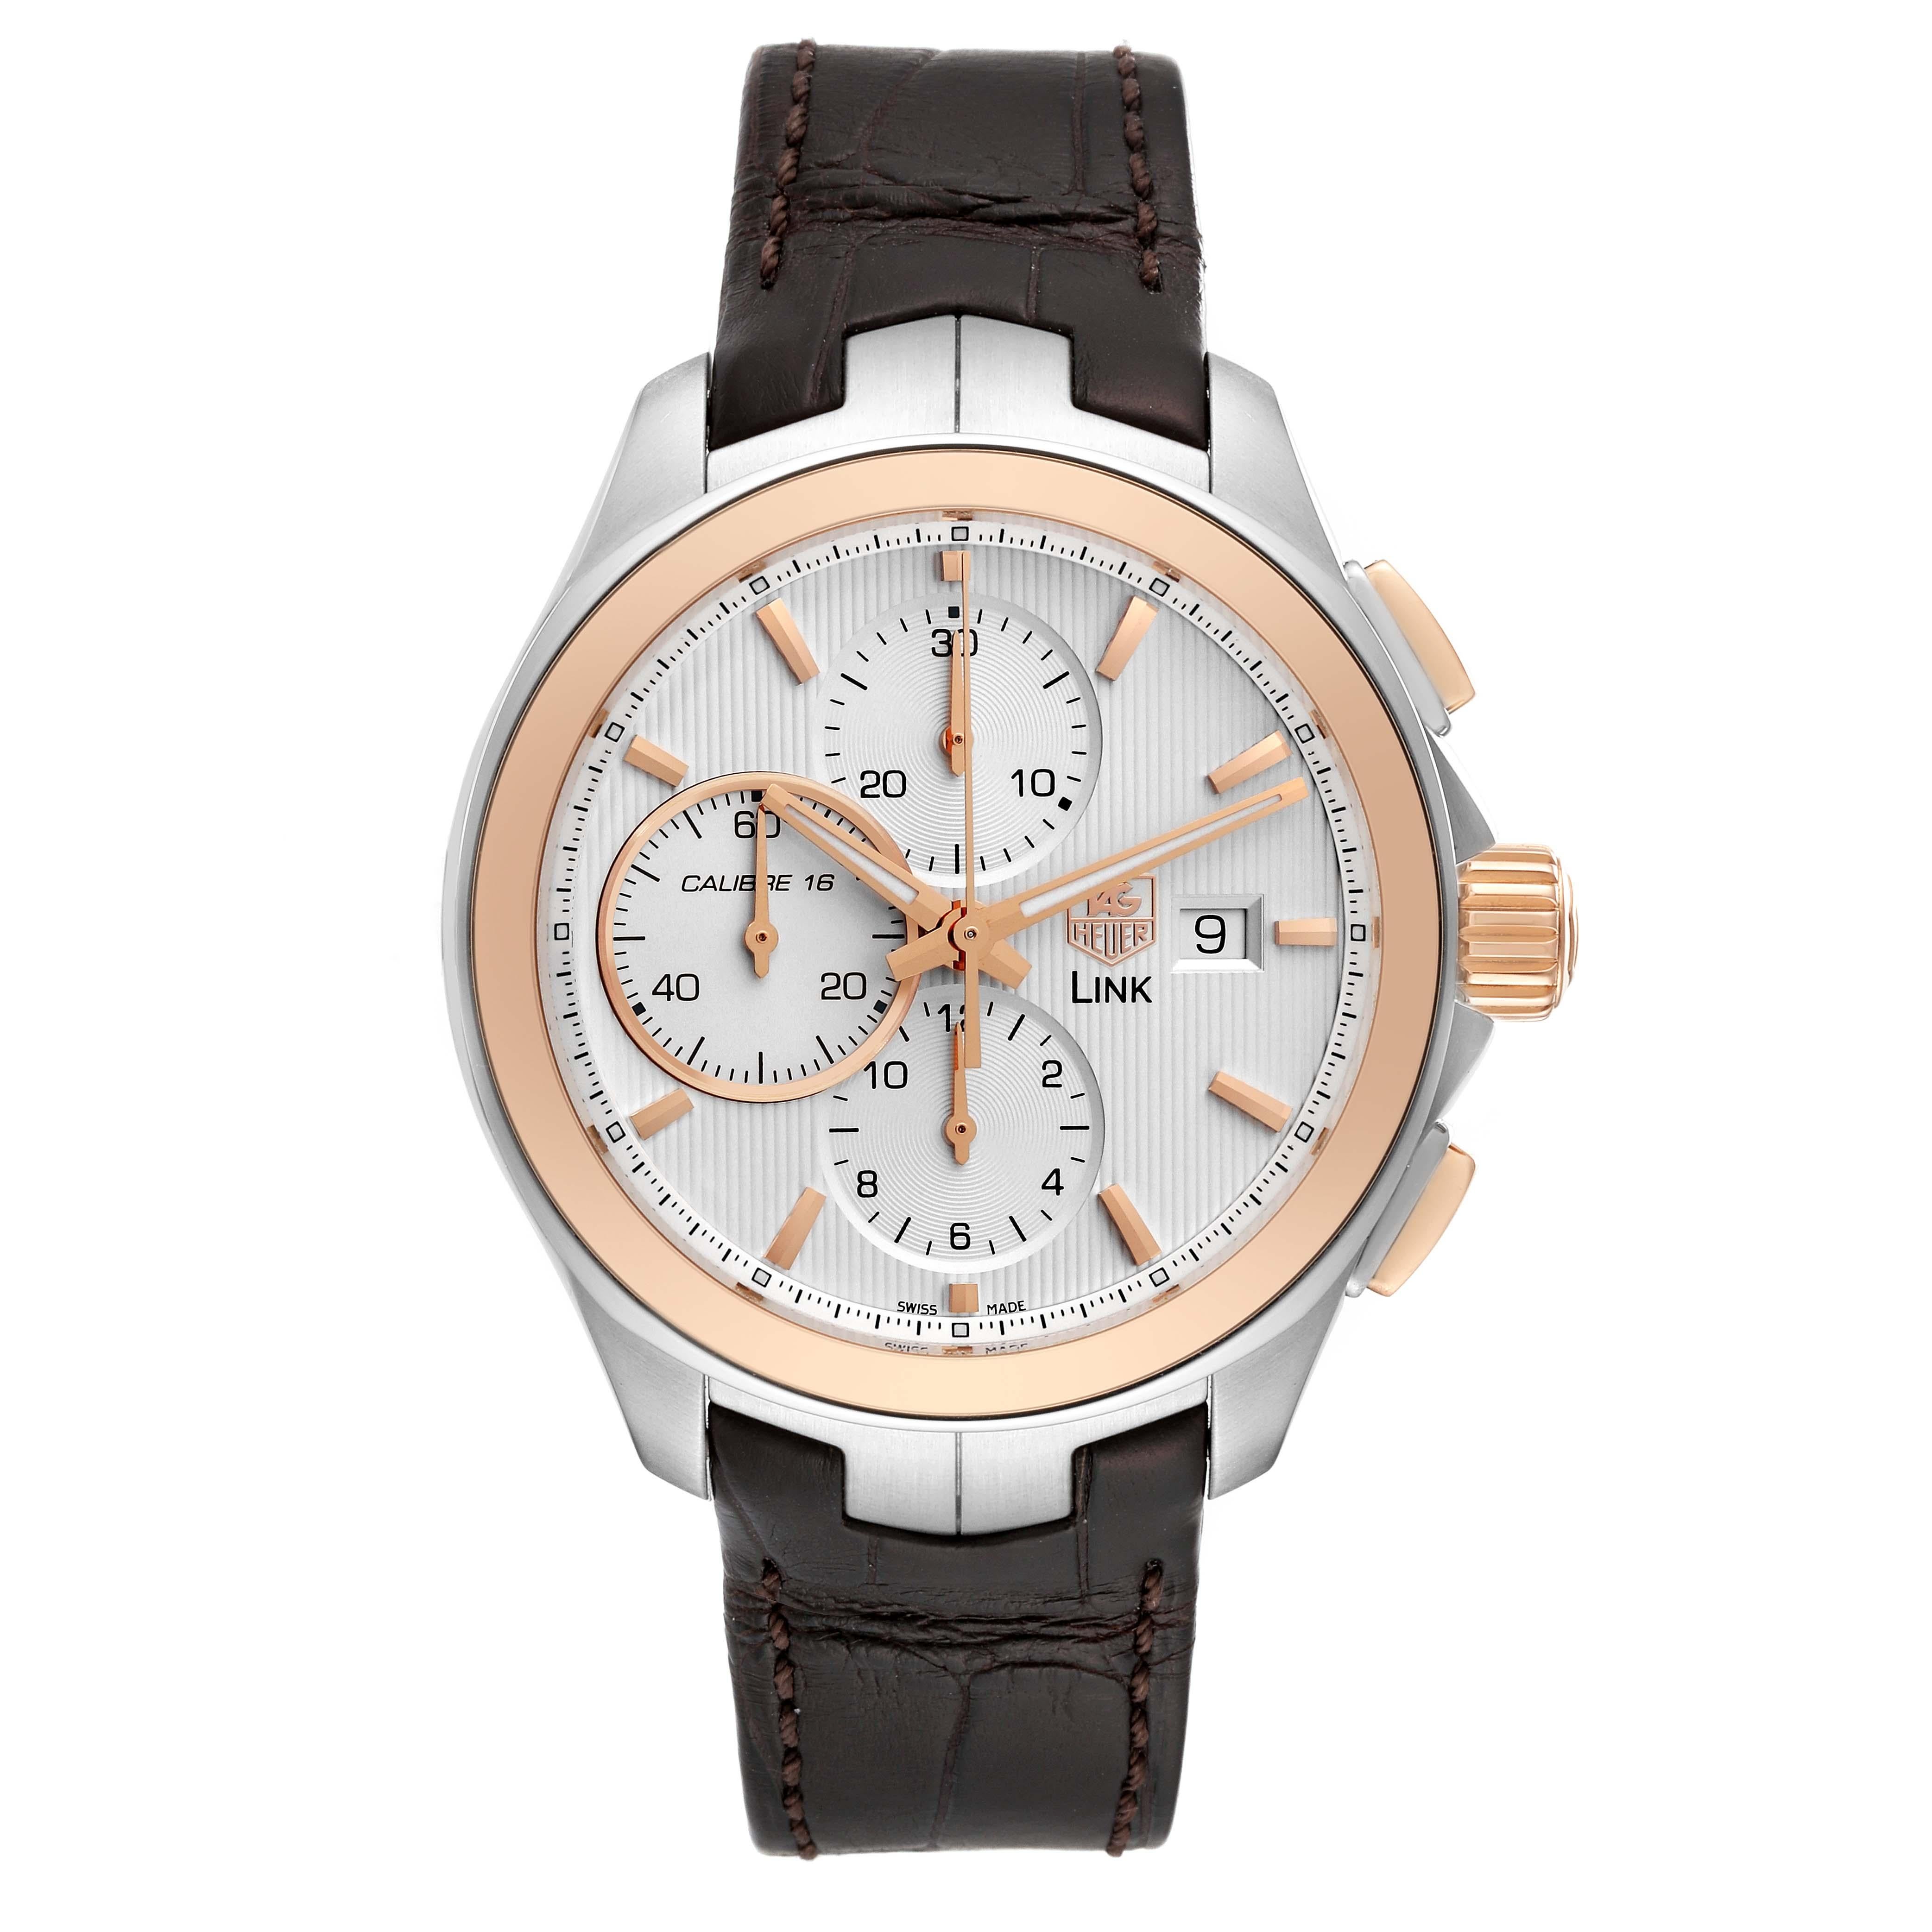 TAG Heuer Link Steel Rose Gold Chronograph Mens Watch CAT2050. Automatic movement. Stainless steel and rose gold case 43.0 mm in diameter. 18k rose gold tachimetric bezel. Scratch resistant sapphire crystal. Silver dial with luminous hands and index